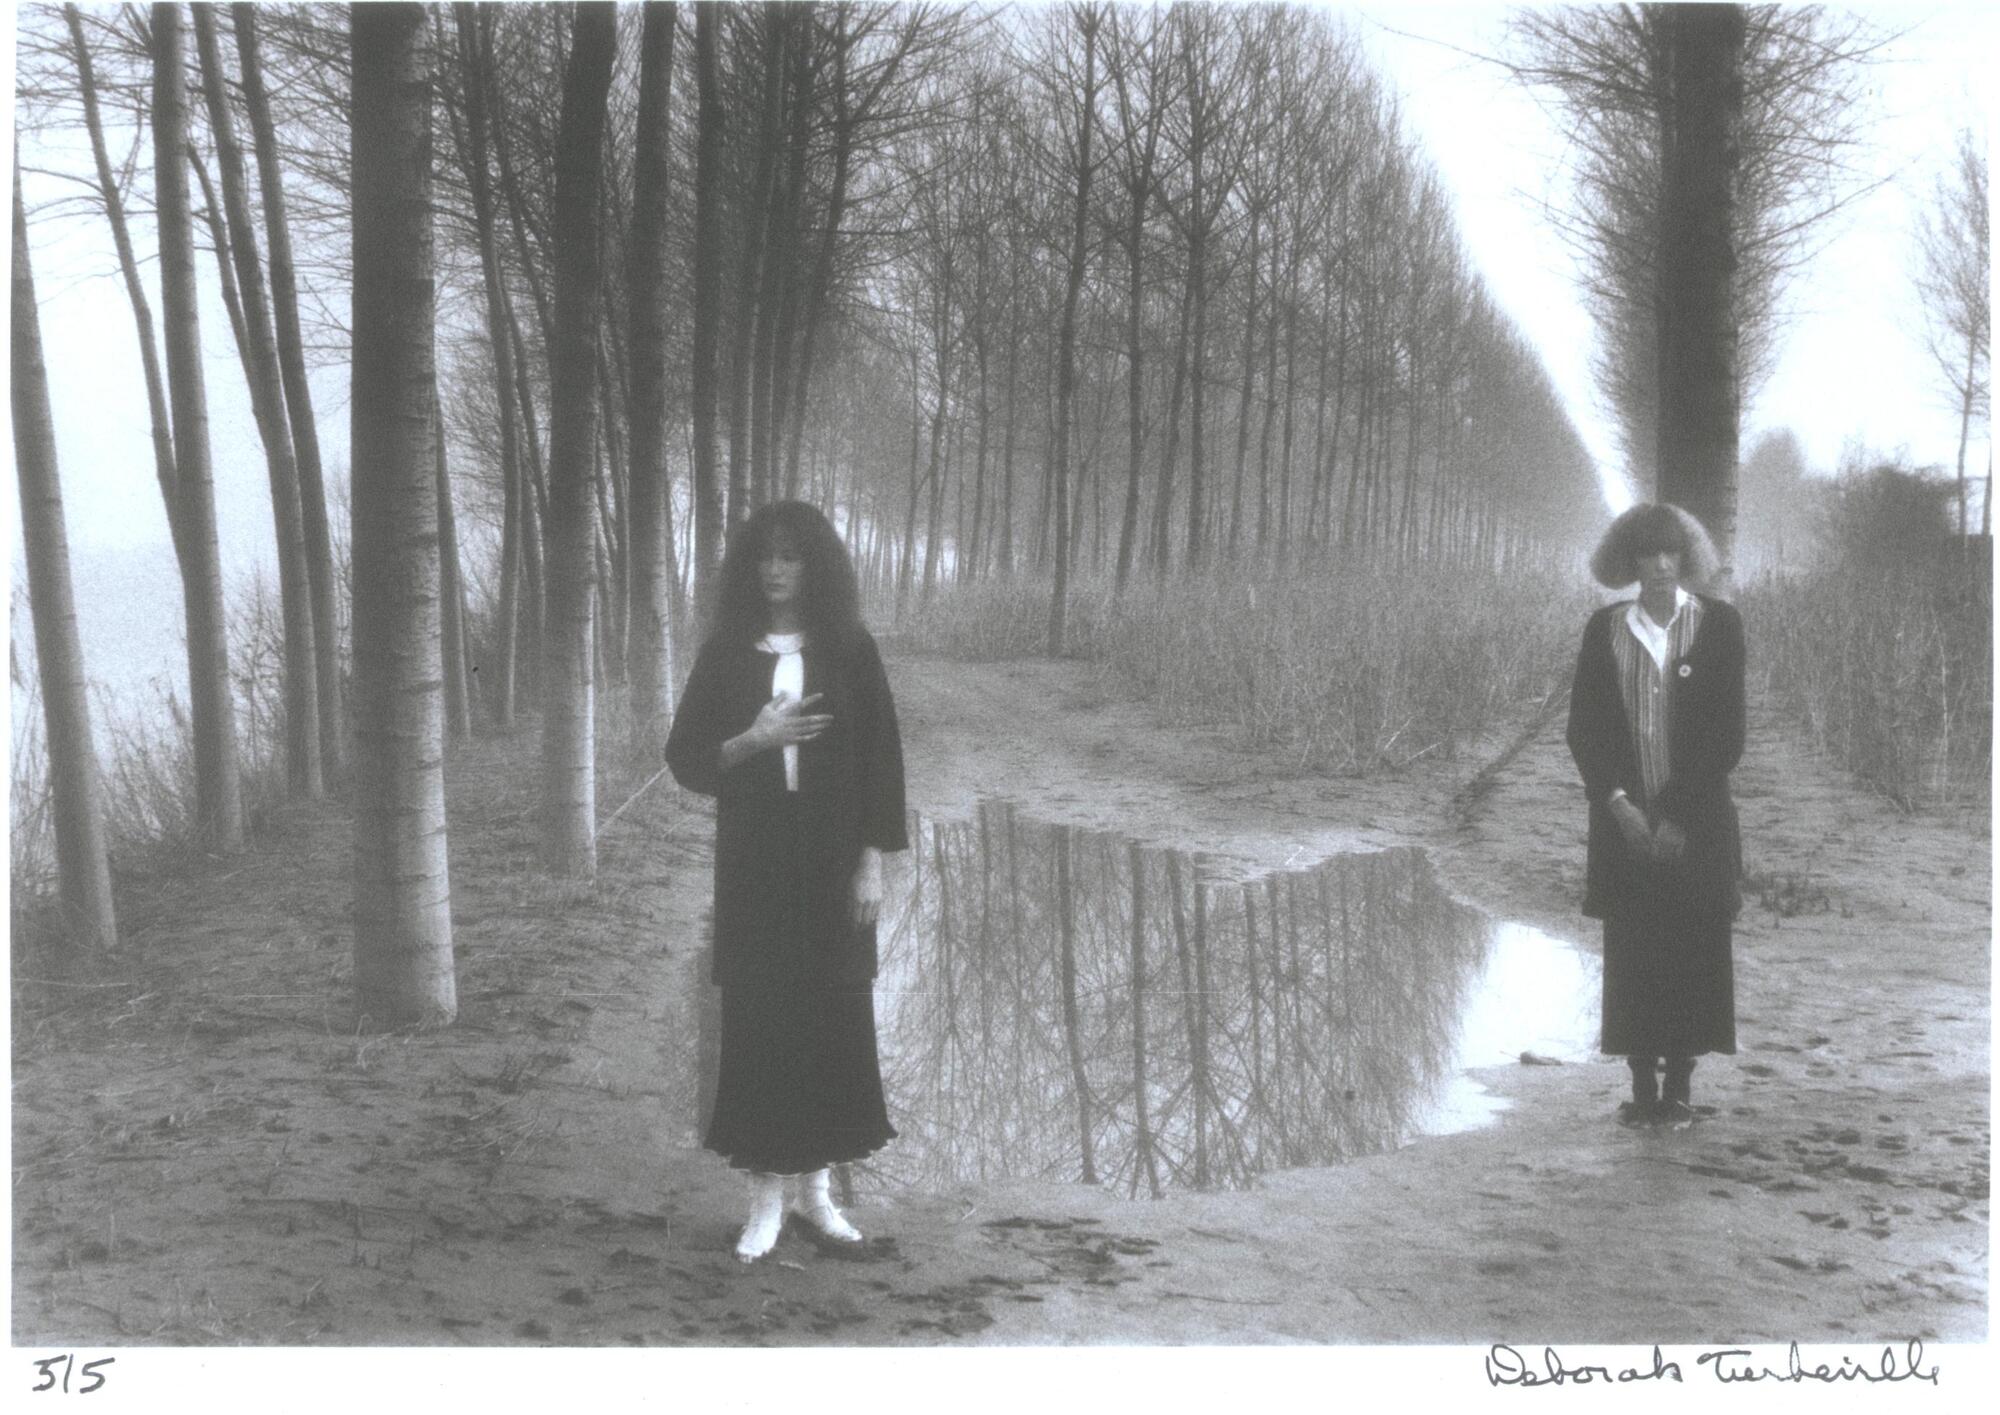 A photograph of two women standing outdoors. They stand next to a puddle of water, one left of center, one on the right side of the frame. Rows of trees extend into the background behind them.